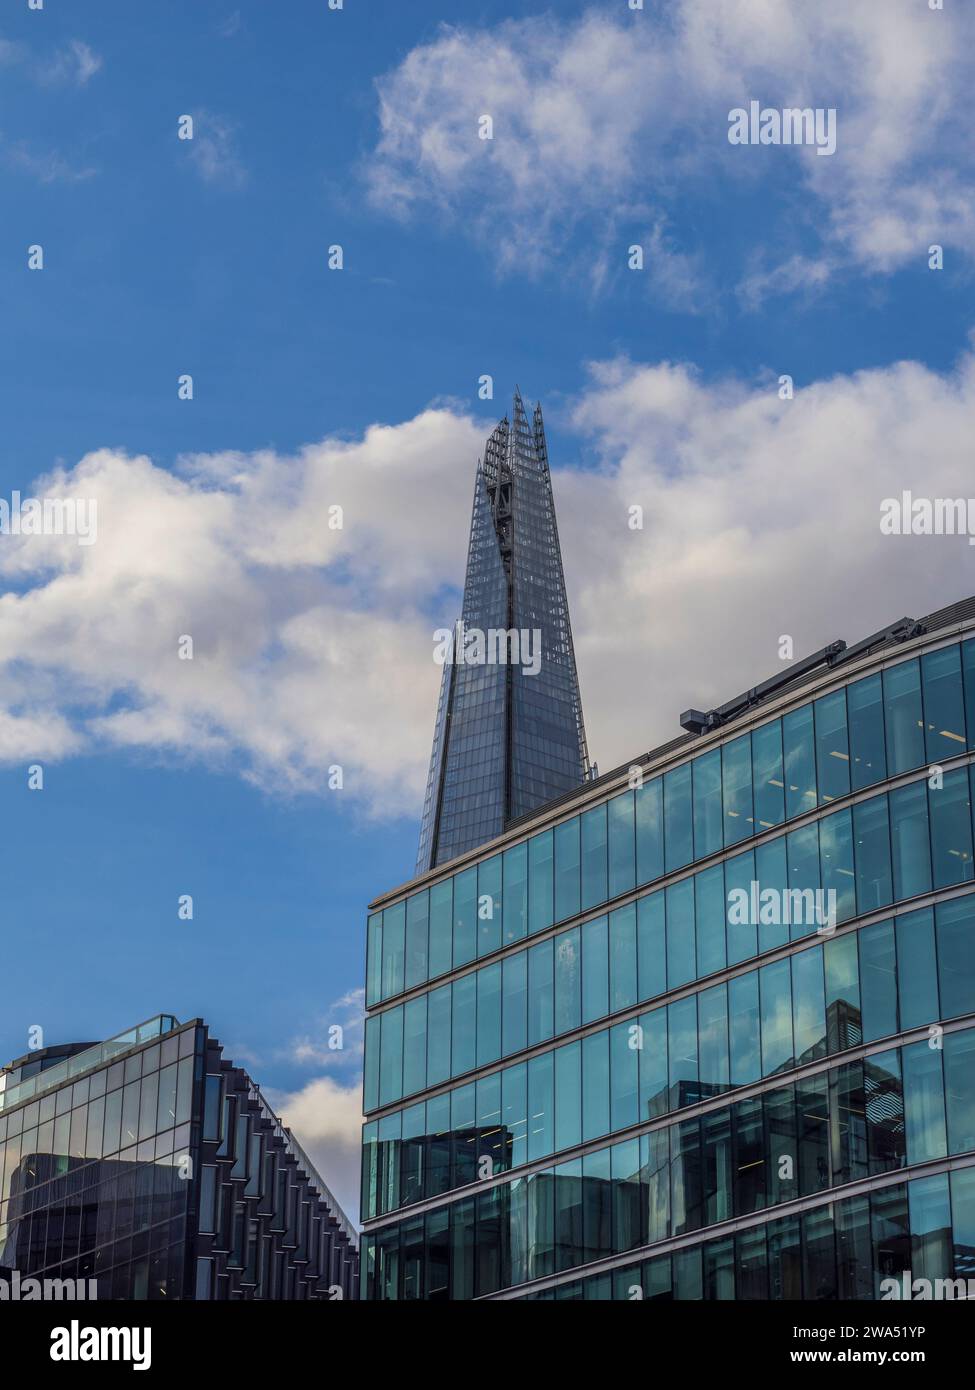 The Shard and More London Riverside Buildings, South Bank, South London, London, England, GROSSBRITANNIEN, GB. Stockfoto